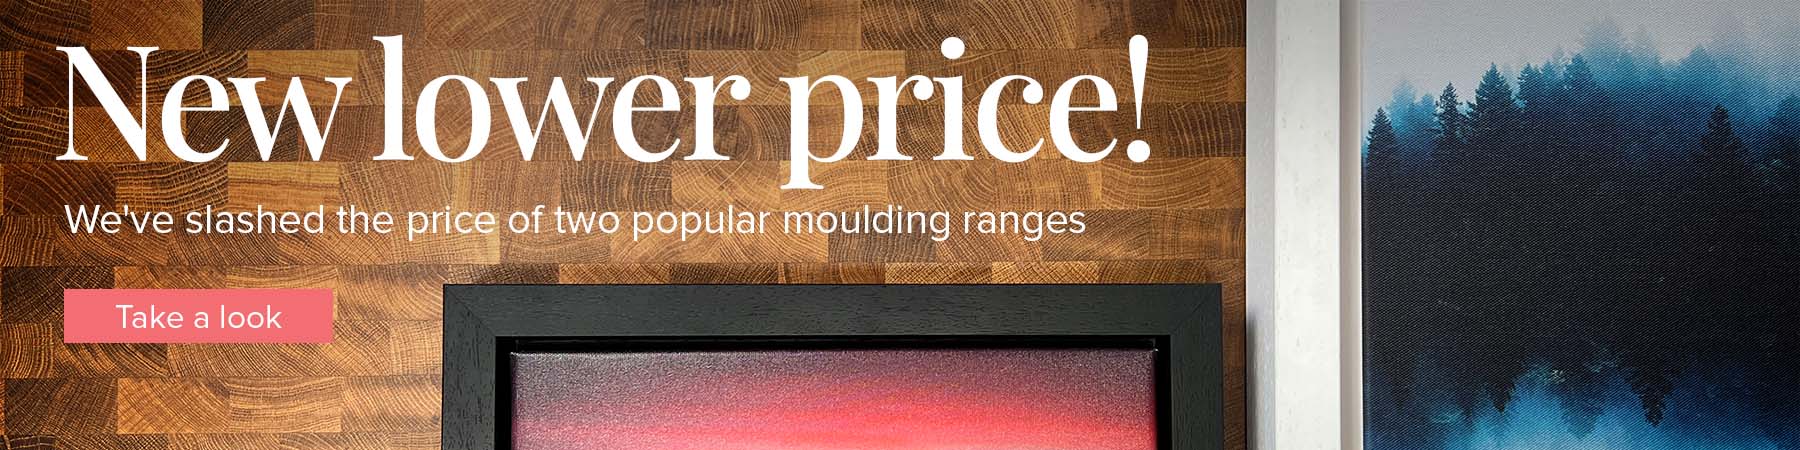 New lower price on two popular moulding ranges